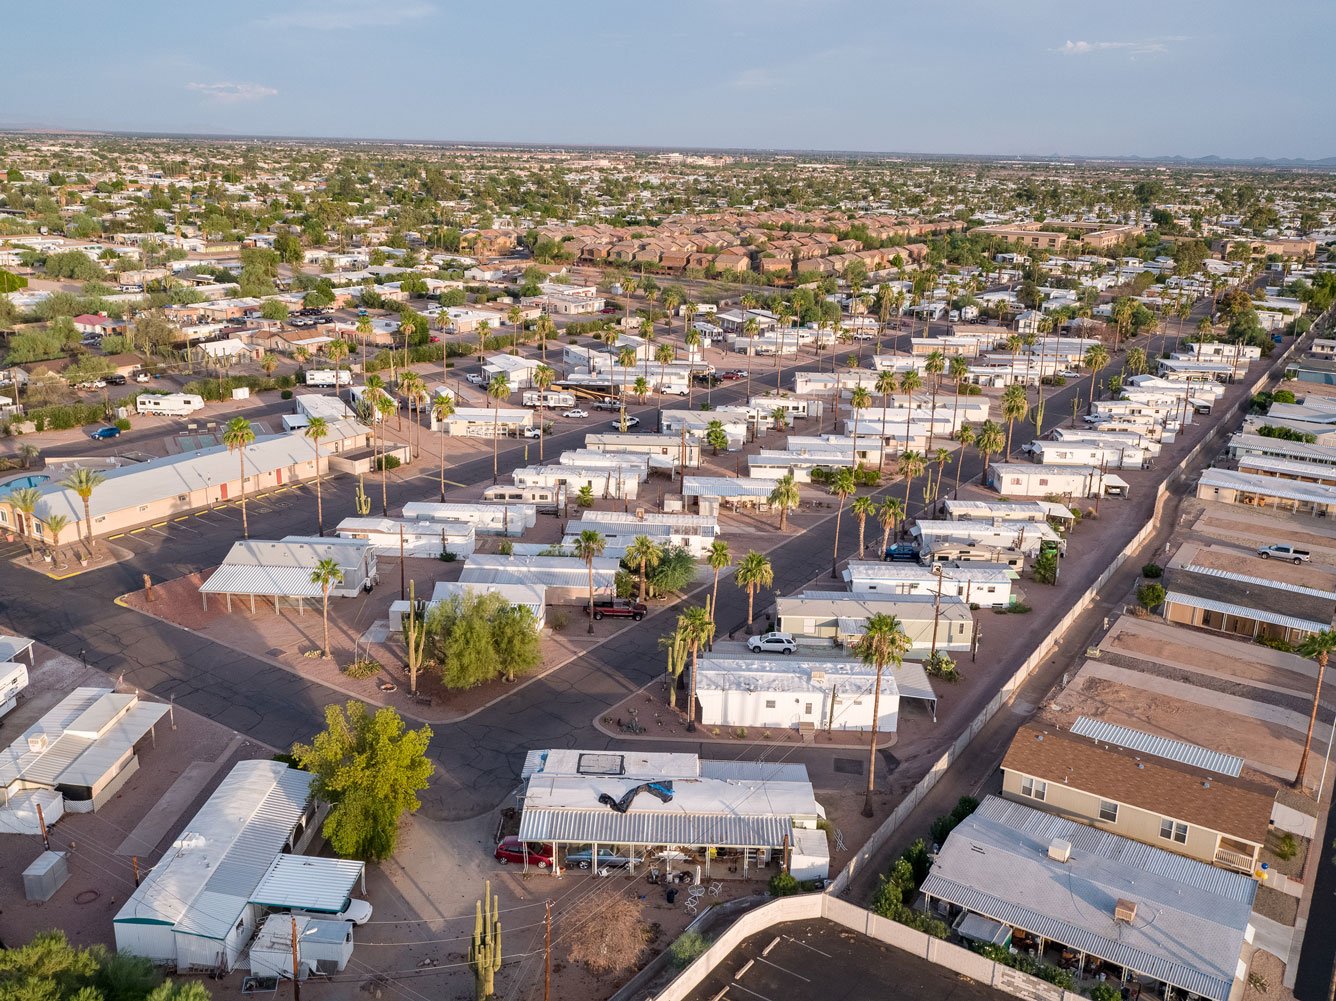 Aerial view of mobile home community